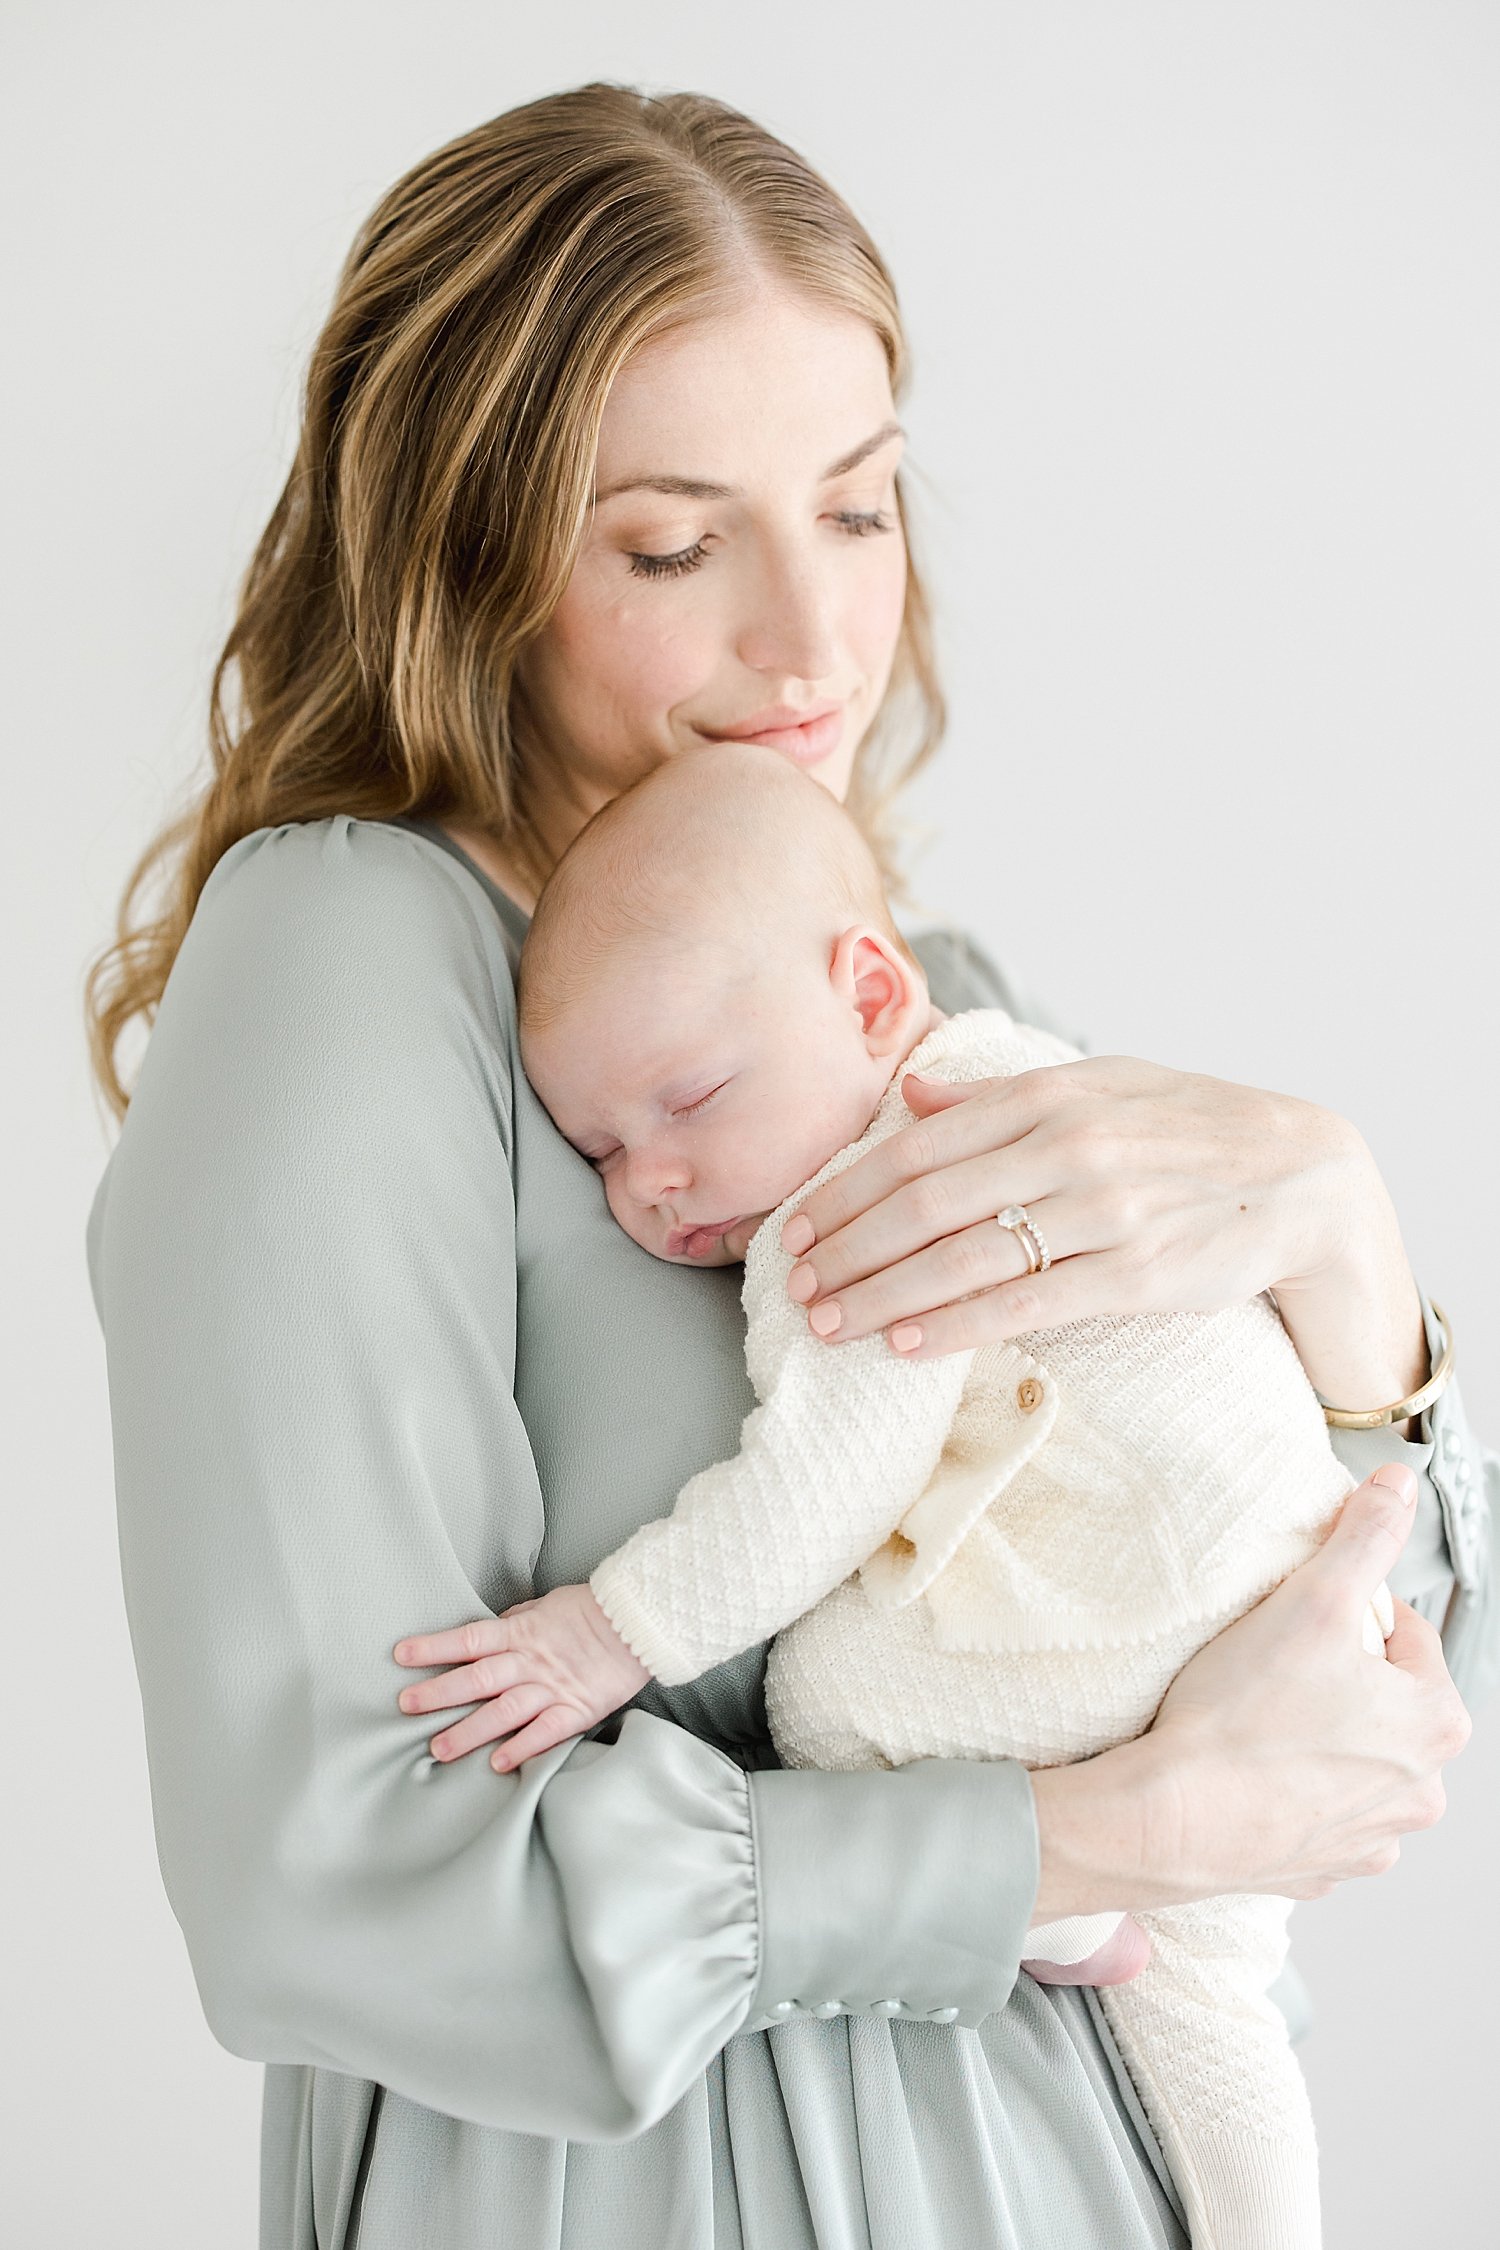 Mom holding newborn son for photos with Kristin Wood Photography.